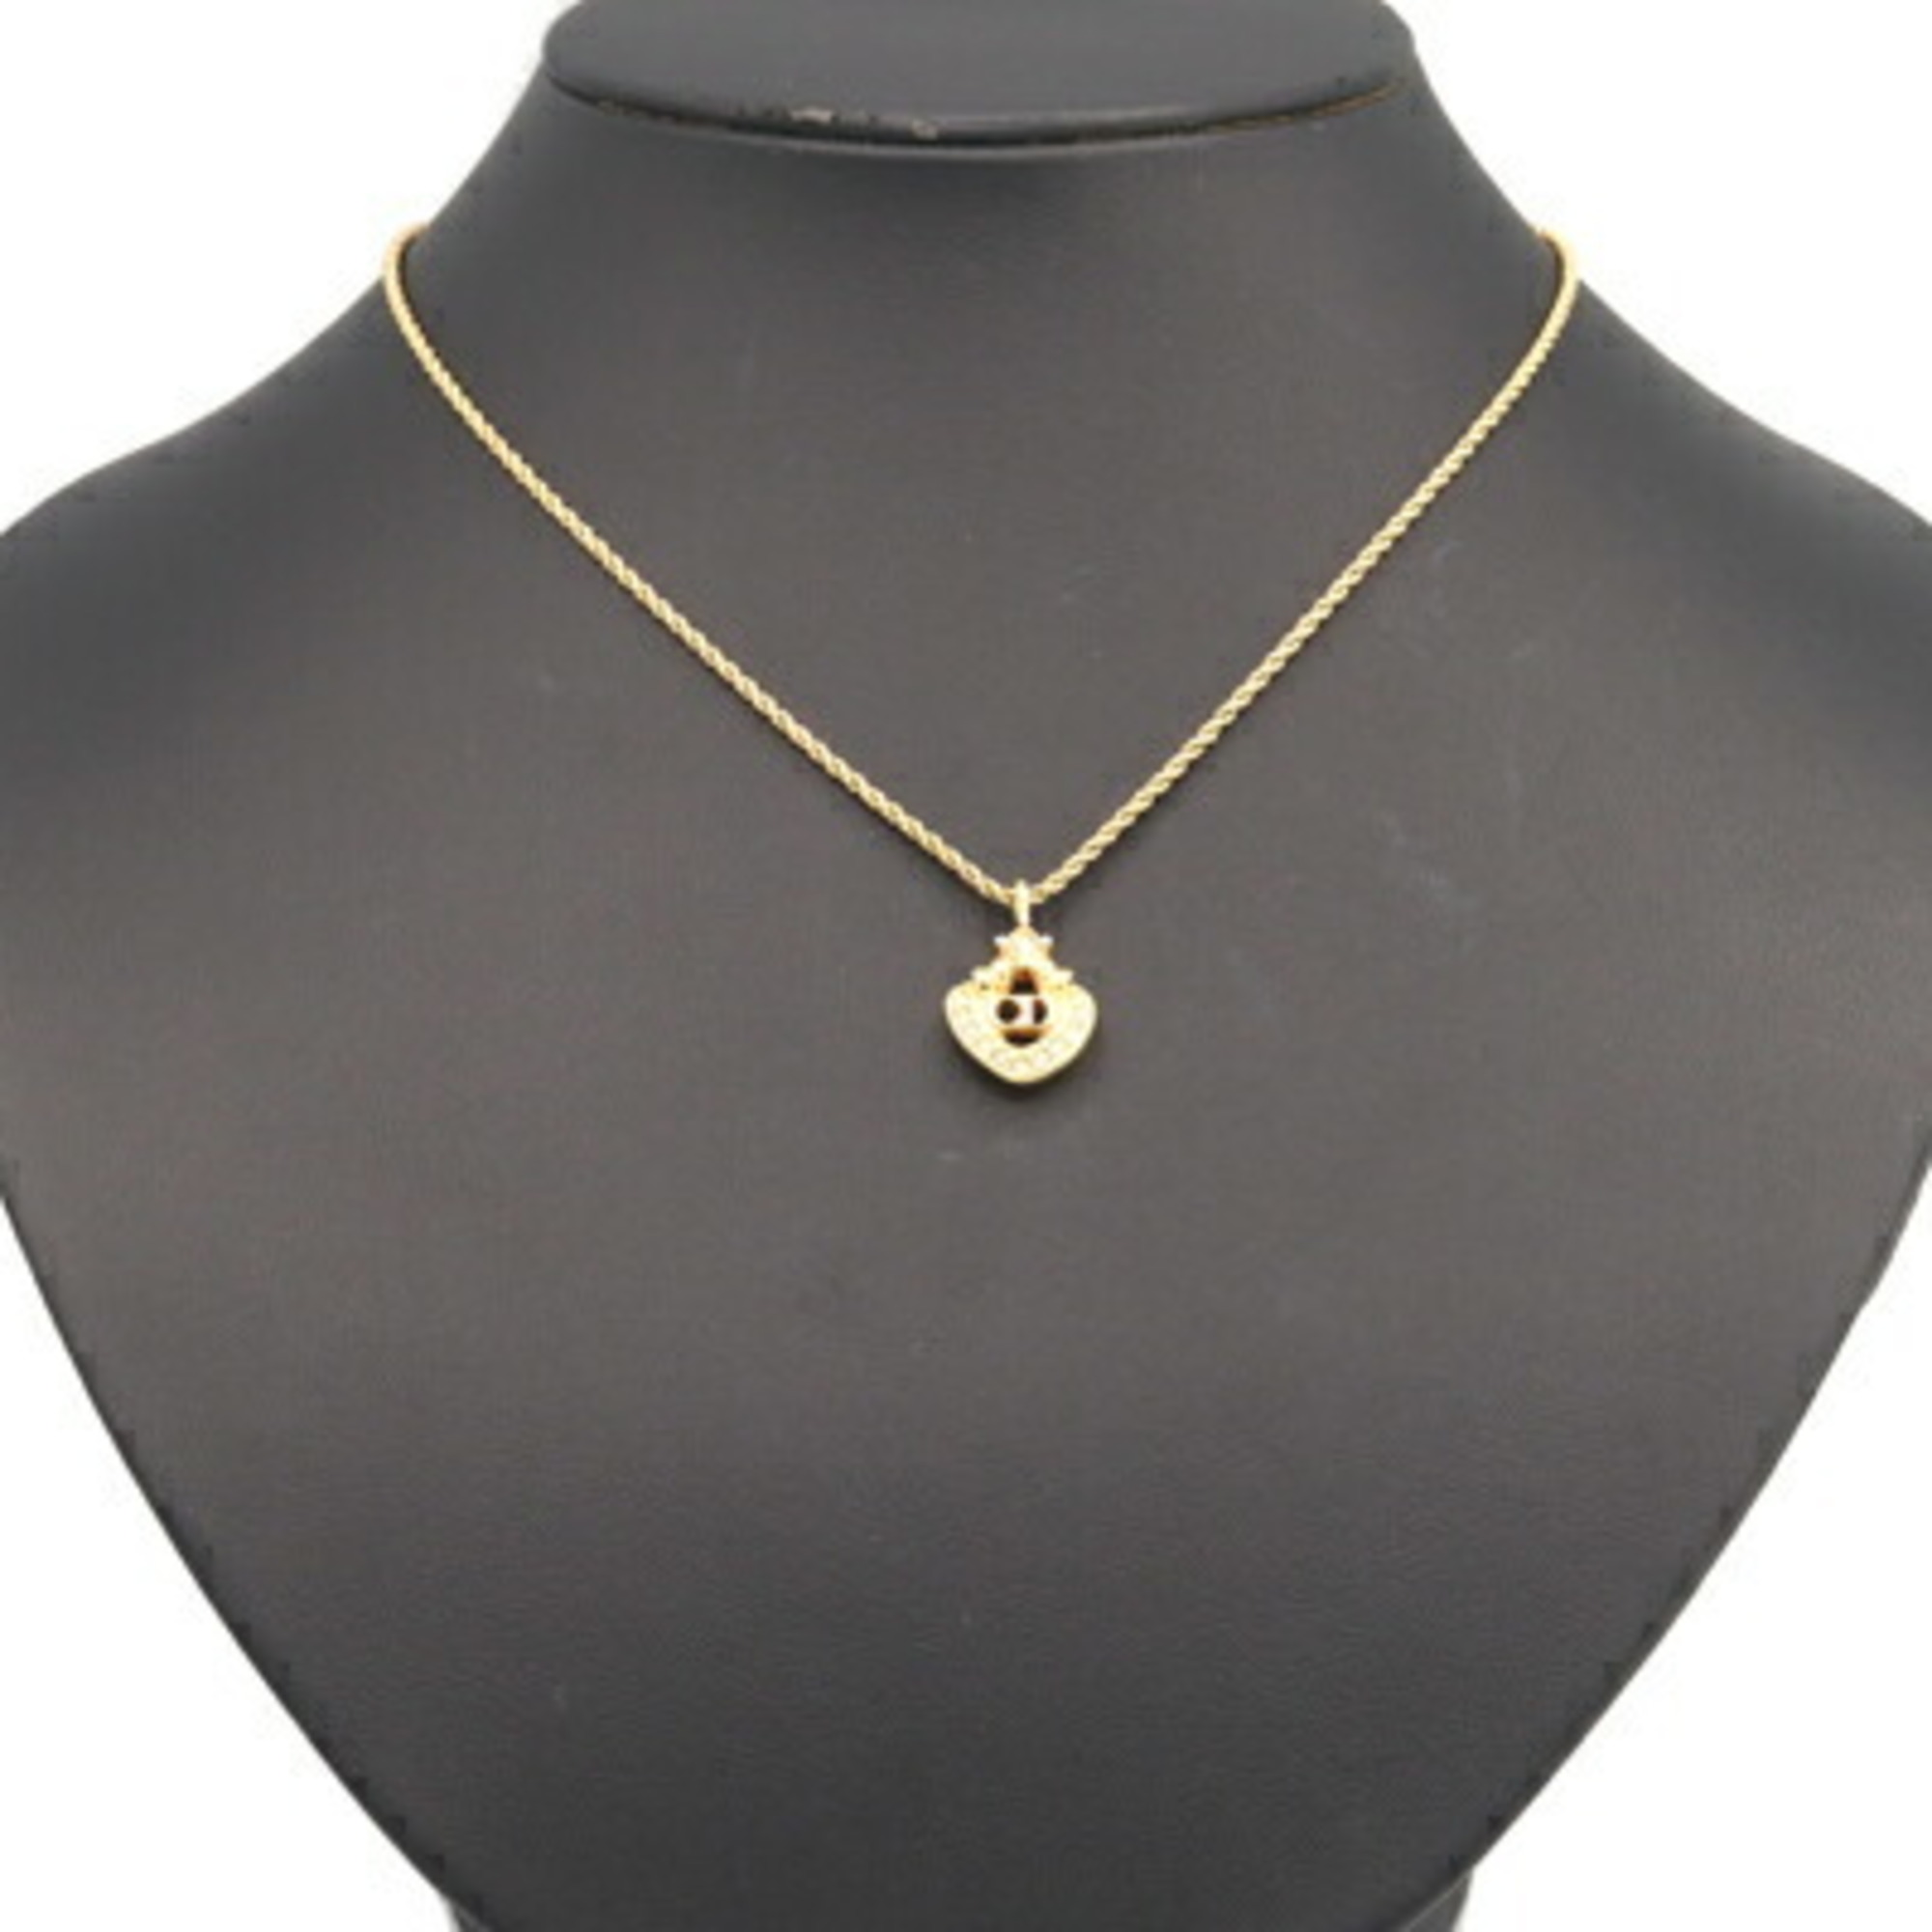 Christian Dior Dior Necklace Gold Metal Heart Stone CD Women's Christian